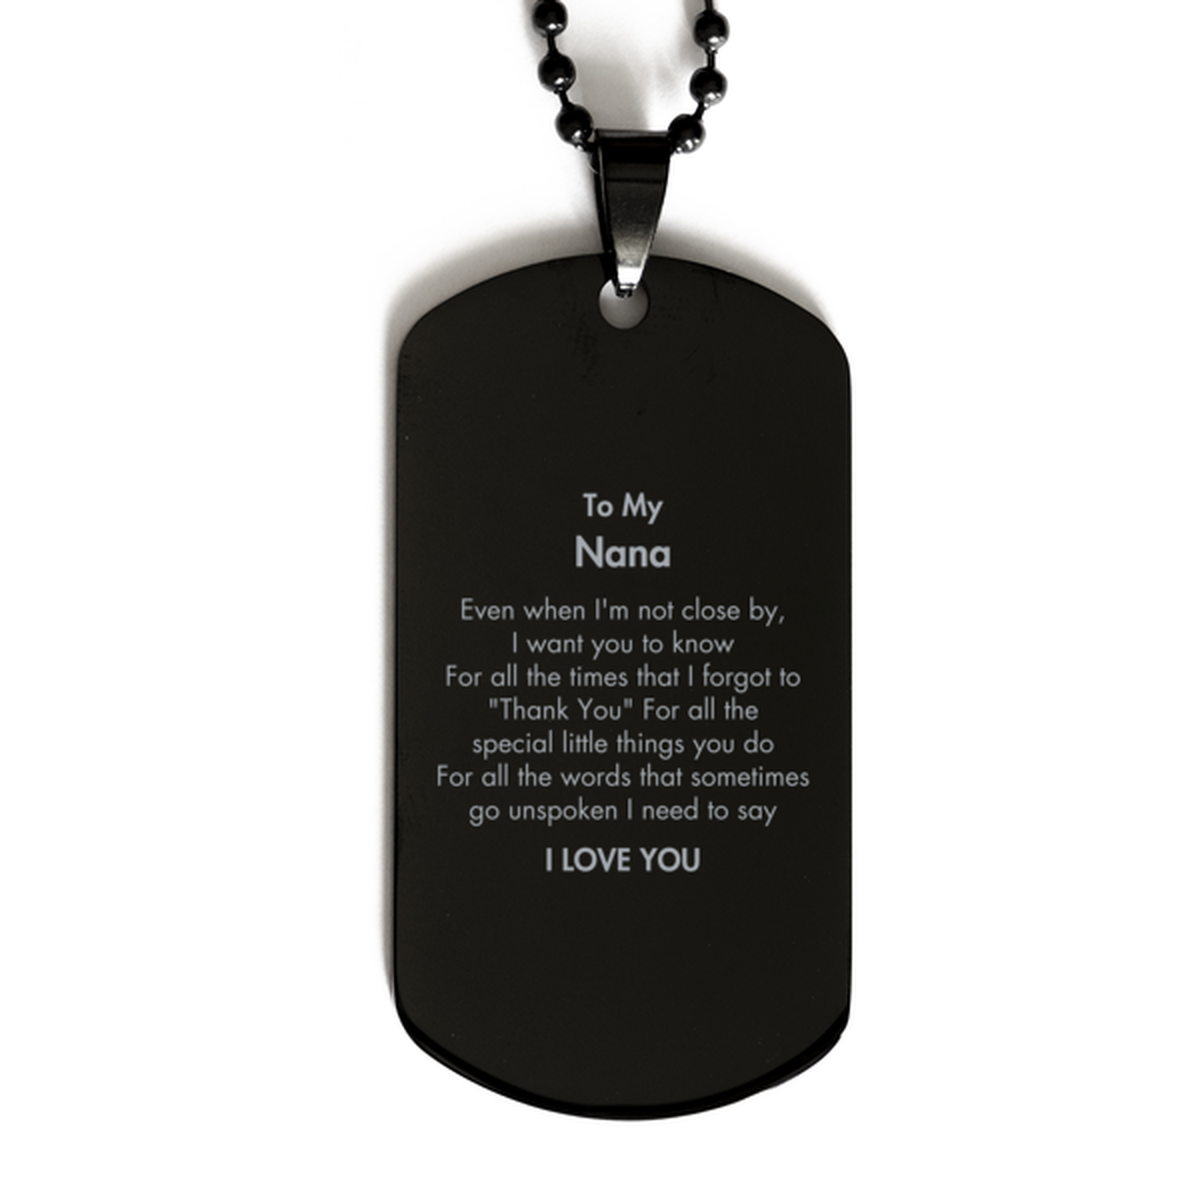 Thank You Gifts for Nana, Keepsake Black Dog Tag Gifts for Nana Birthday Mother's day Father's Day Nana For all the words That sometimes go unspoken I need to say I LOVE YOU